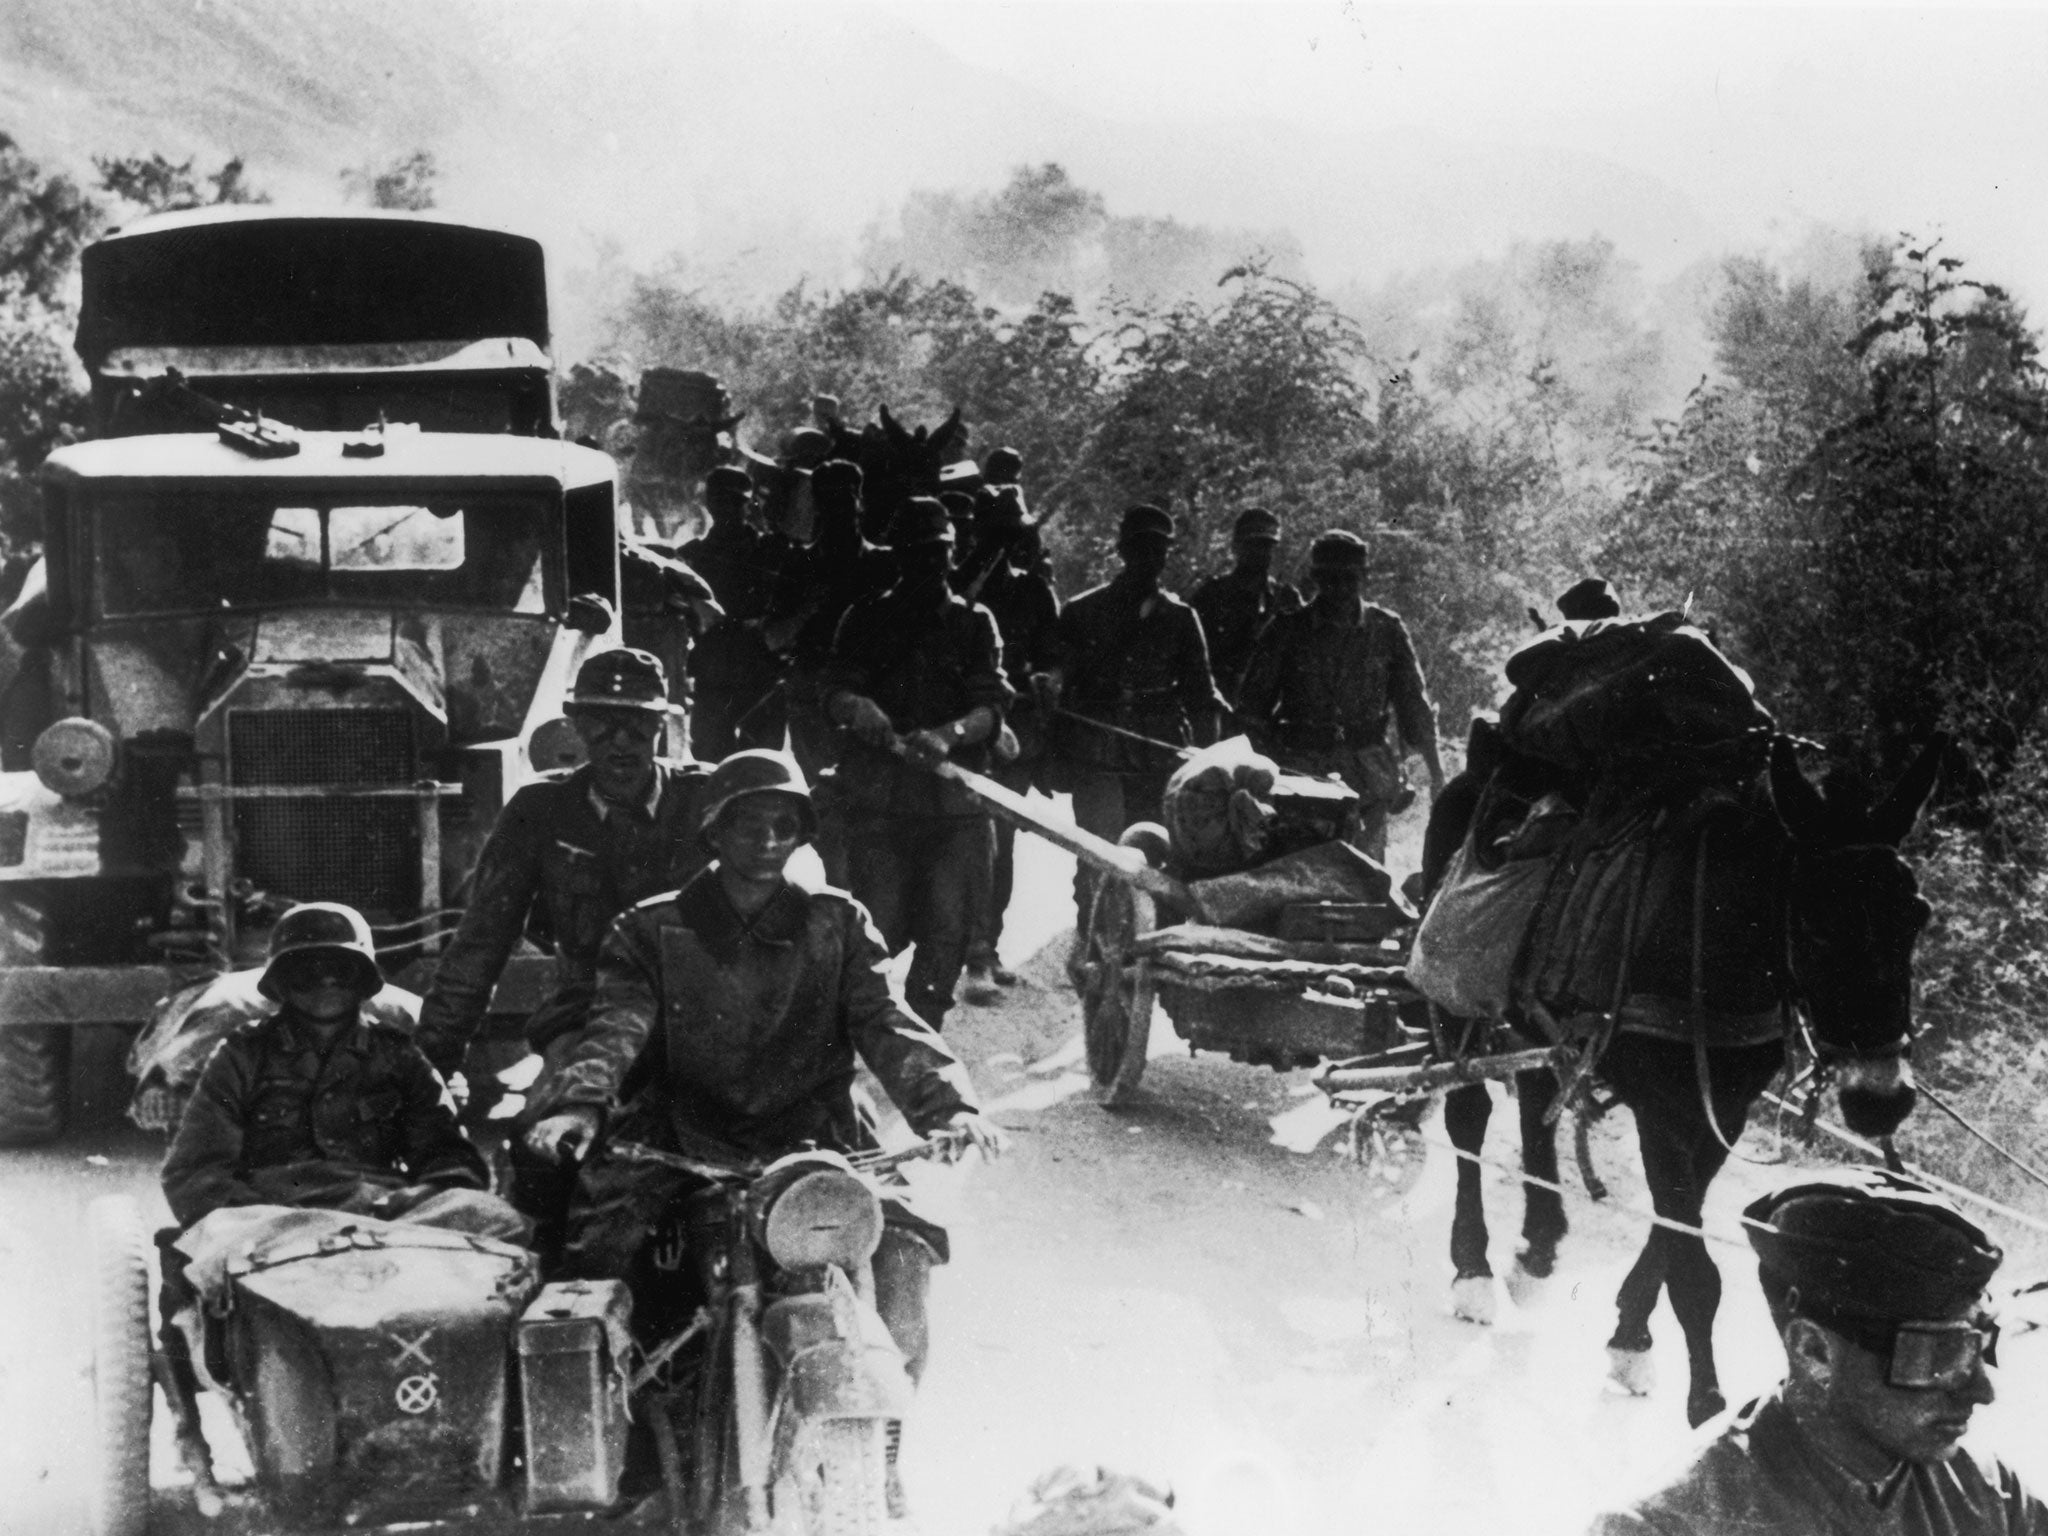 A German military convoy overtakes a group of Greek peasants on a rural track during the early stages of the German occupation of Greece in 1941